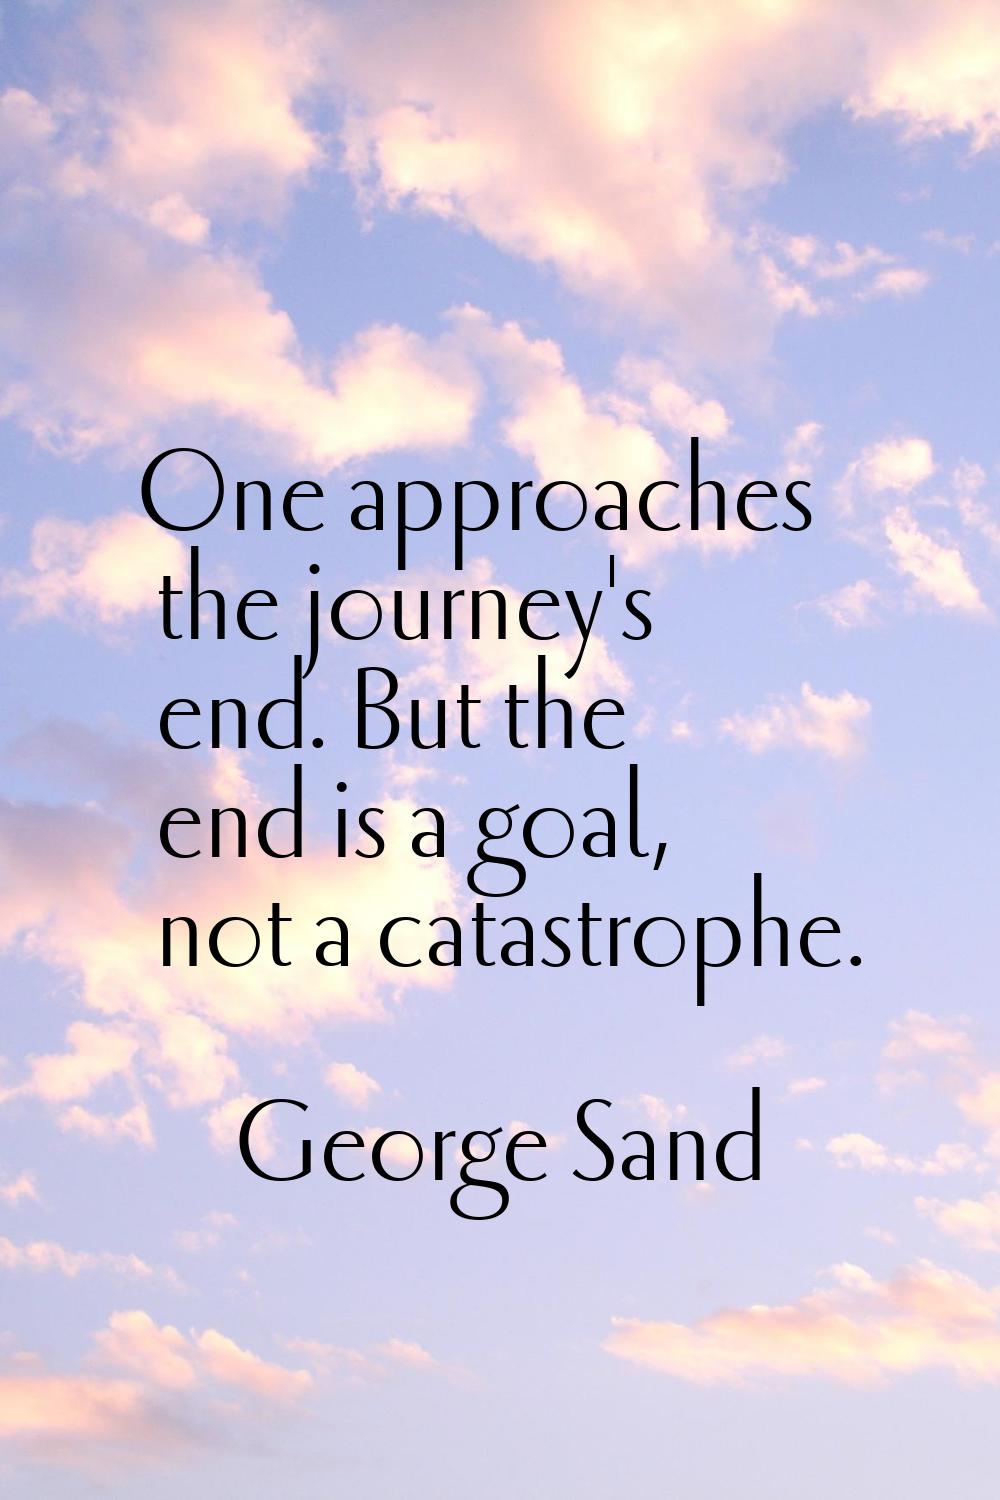 One approaches the journey's end. But the end is a goal, not a catastrophe.